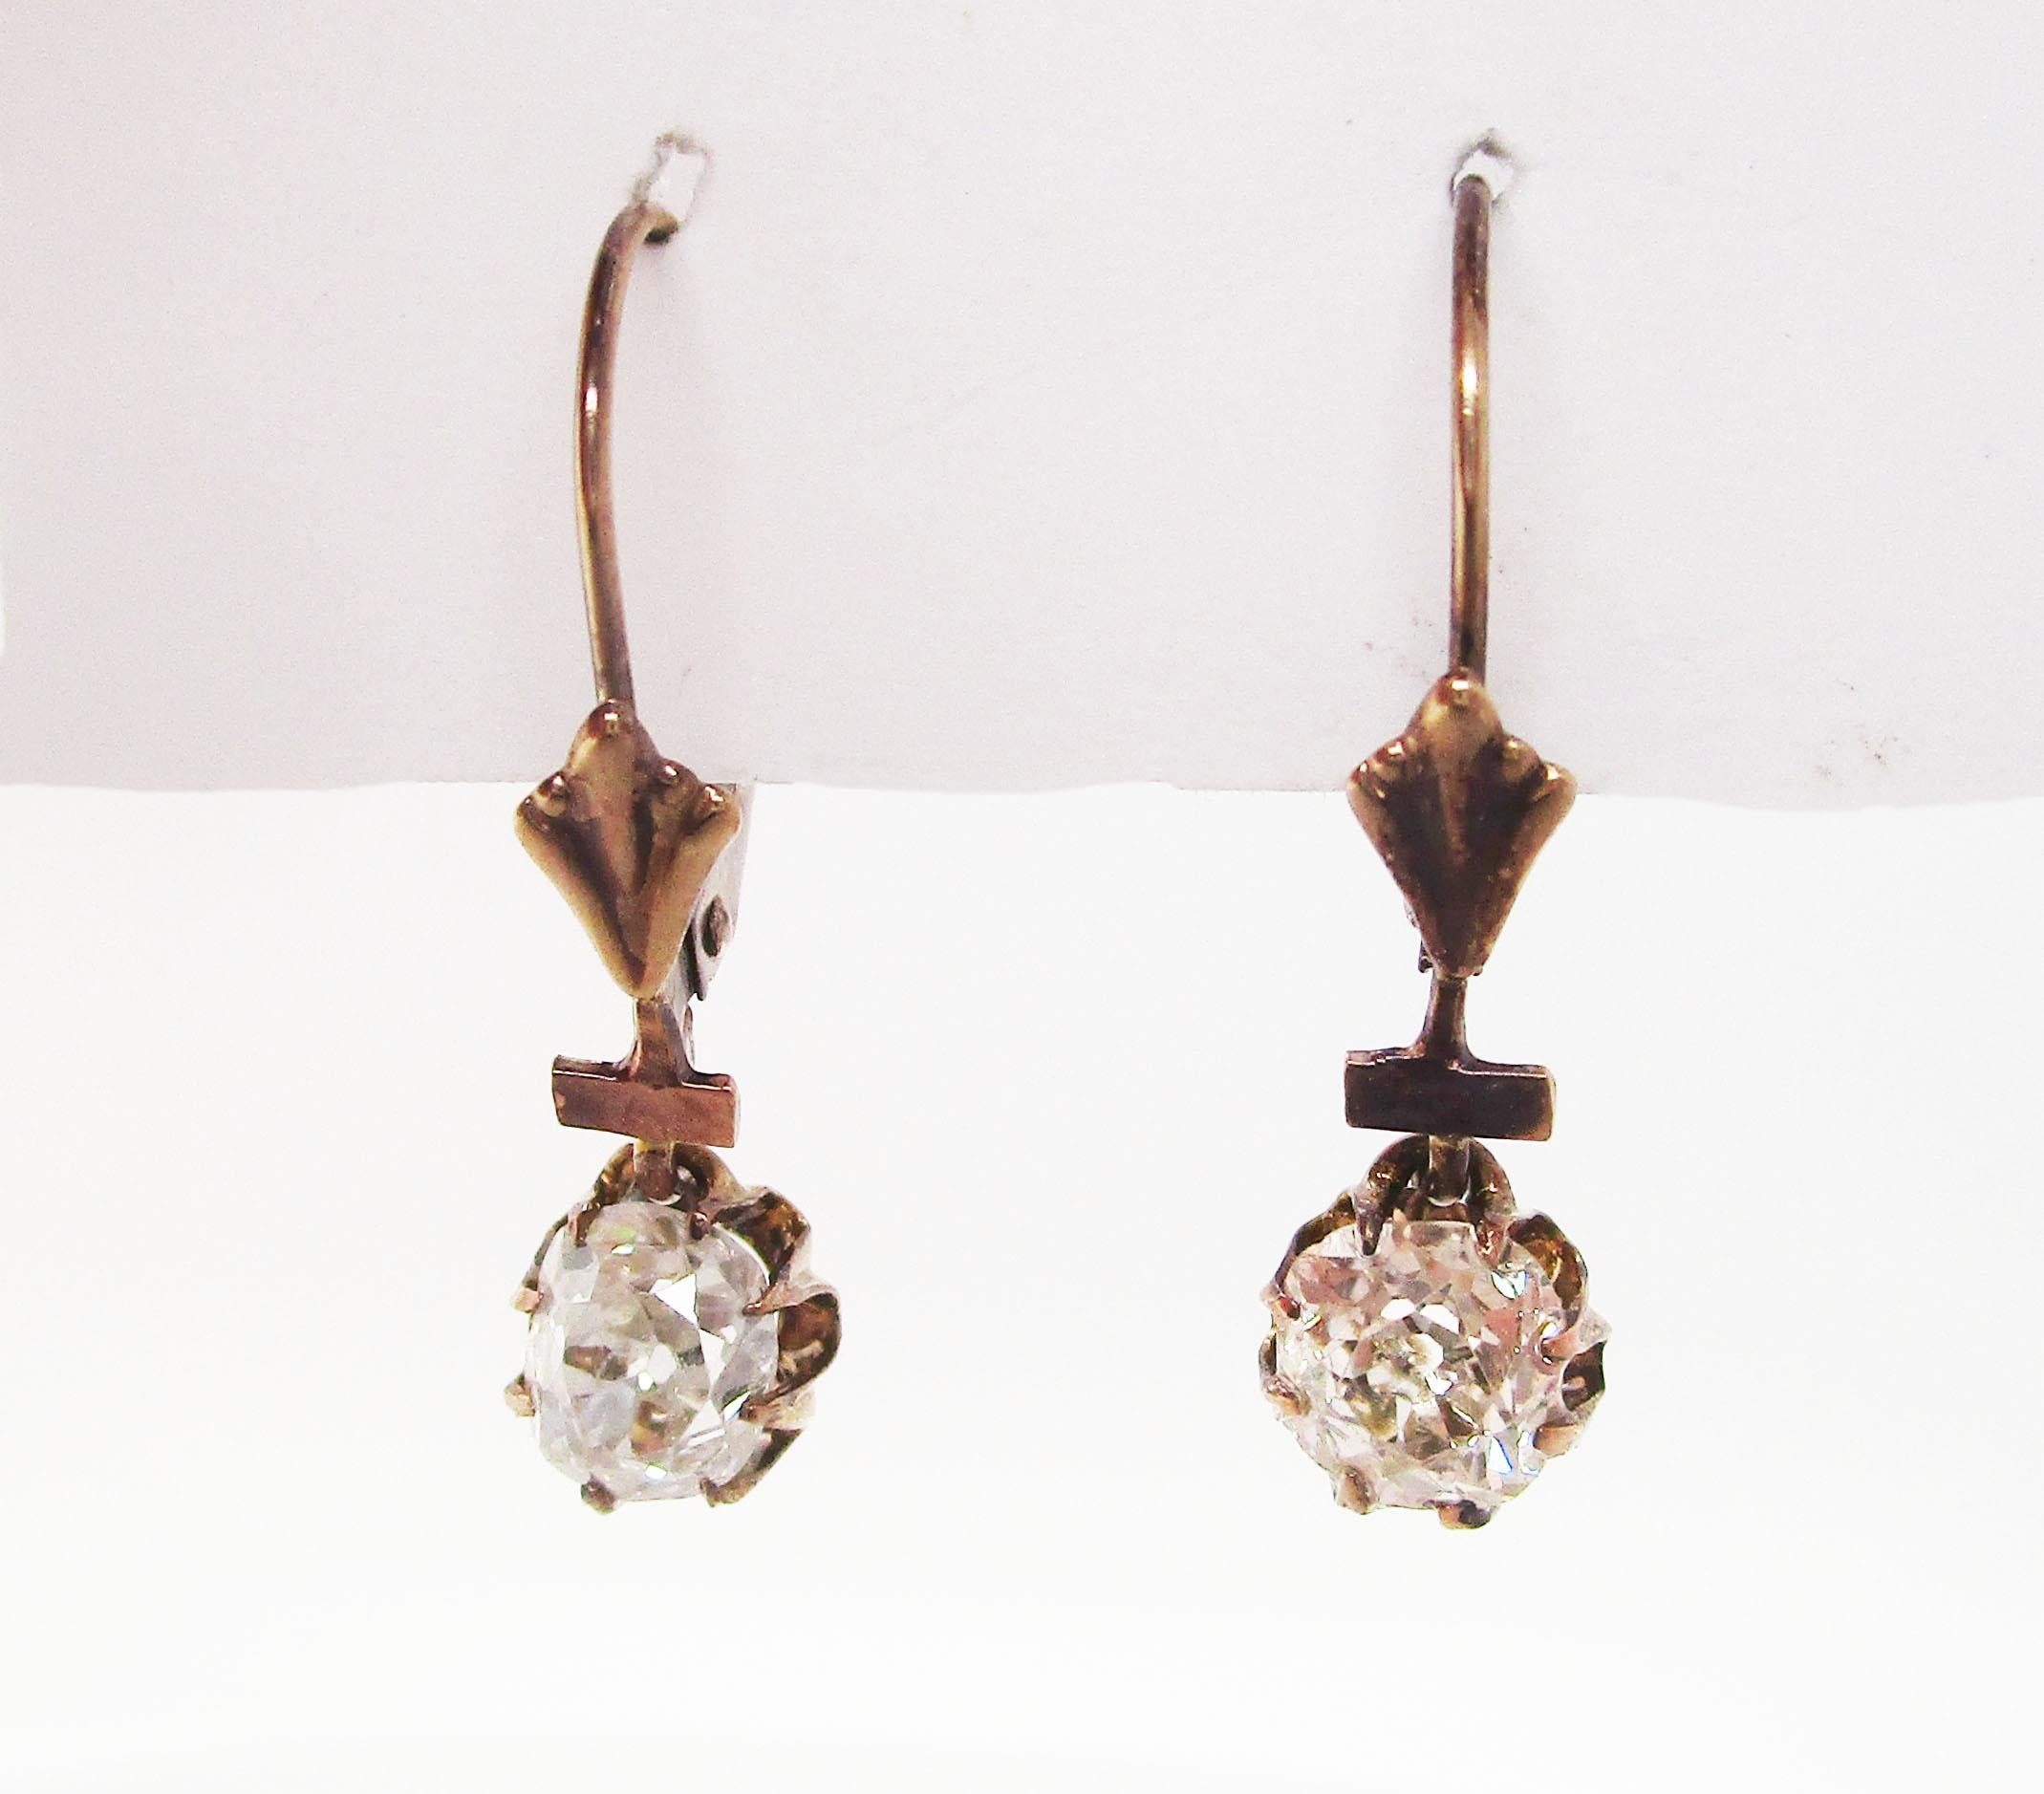 These gorgeous Victorian earrings are in 14k yellow gold and feature two stunning old mine-cut diamond centers. The earrings have the elegant color of aged gold that can only come with the passage of time! The gold forms the perfect frame for the